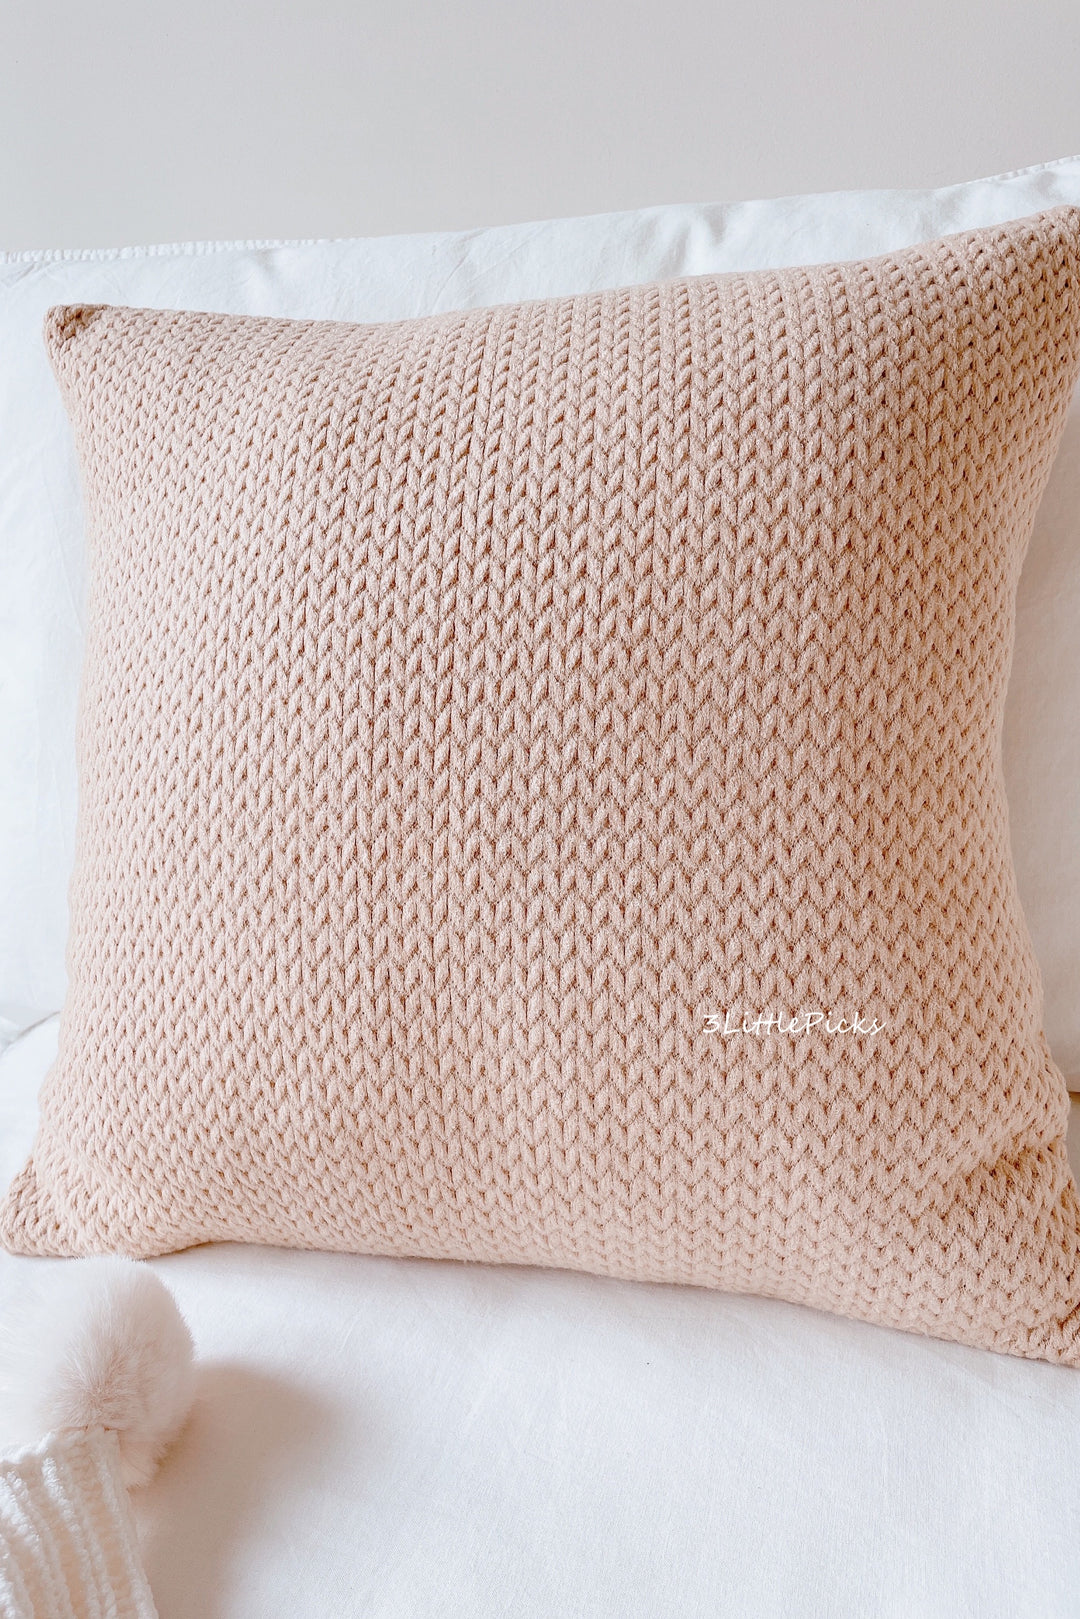 Wheat Ear Knitted Cushion Covers